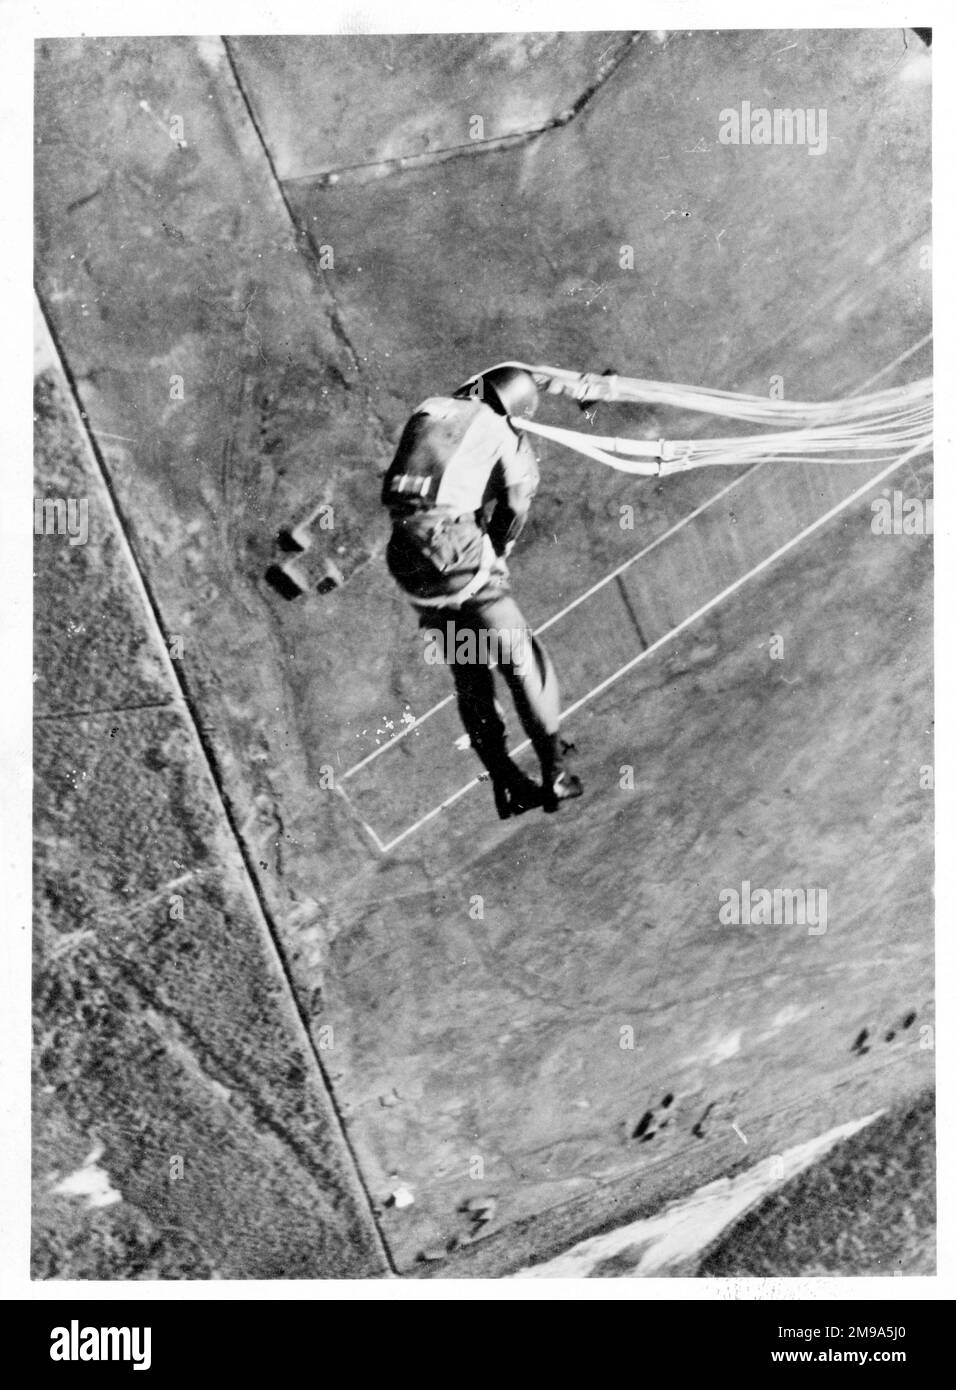 Parachute jump aircraft Black and White Stock Photos & Images - Alamy